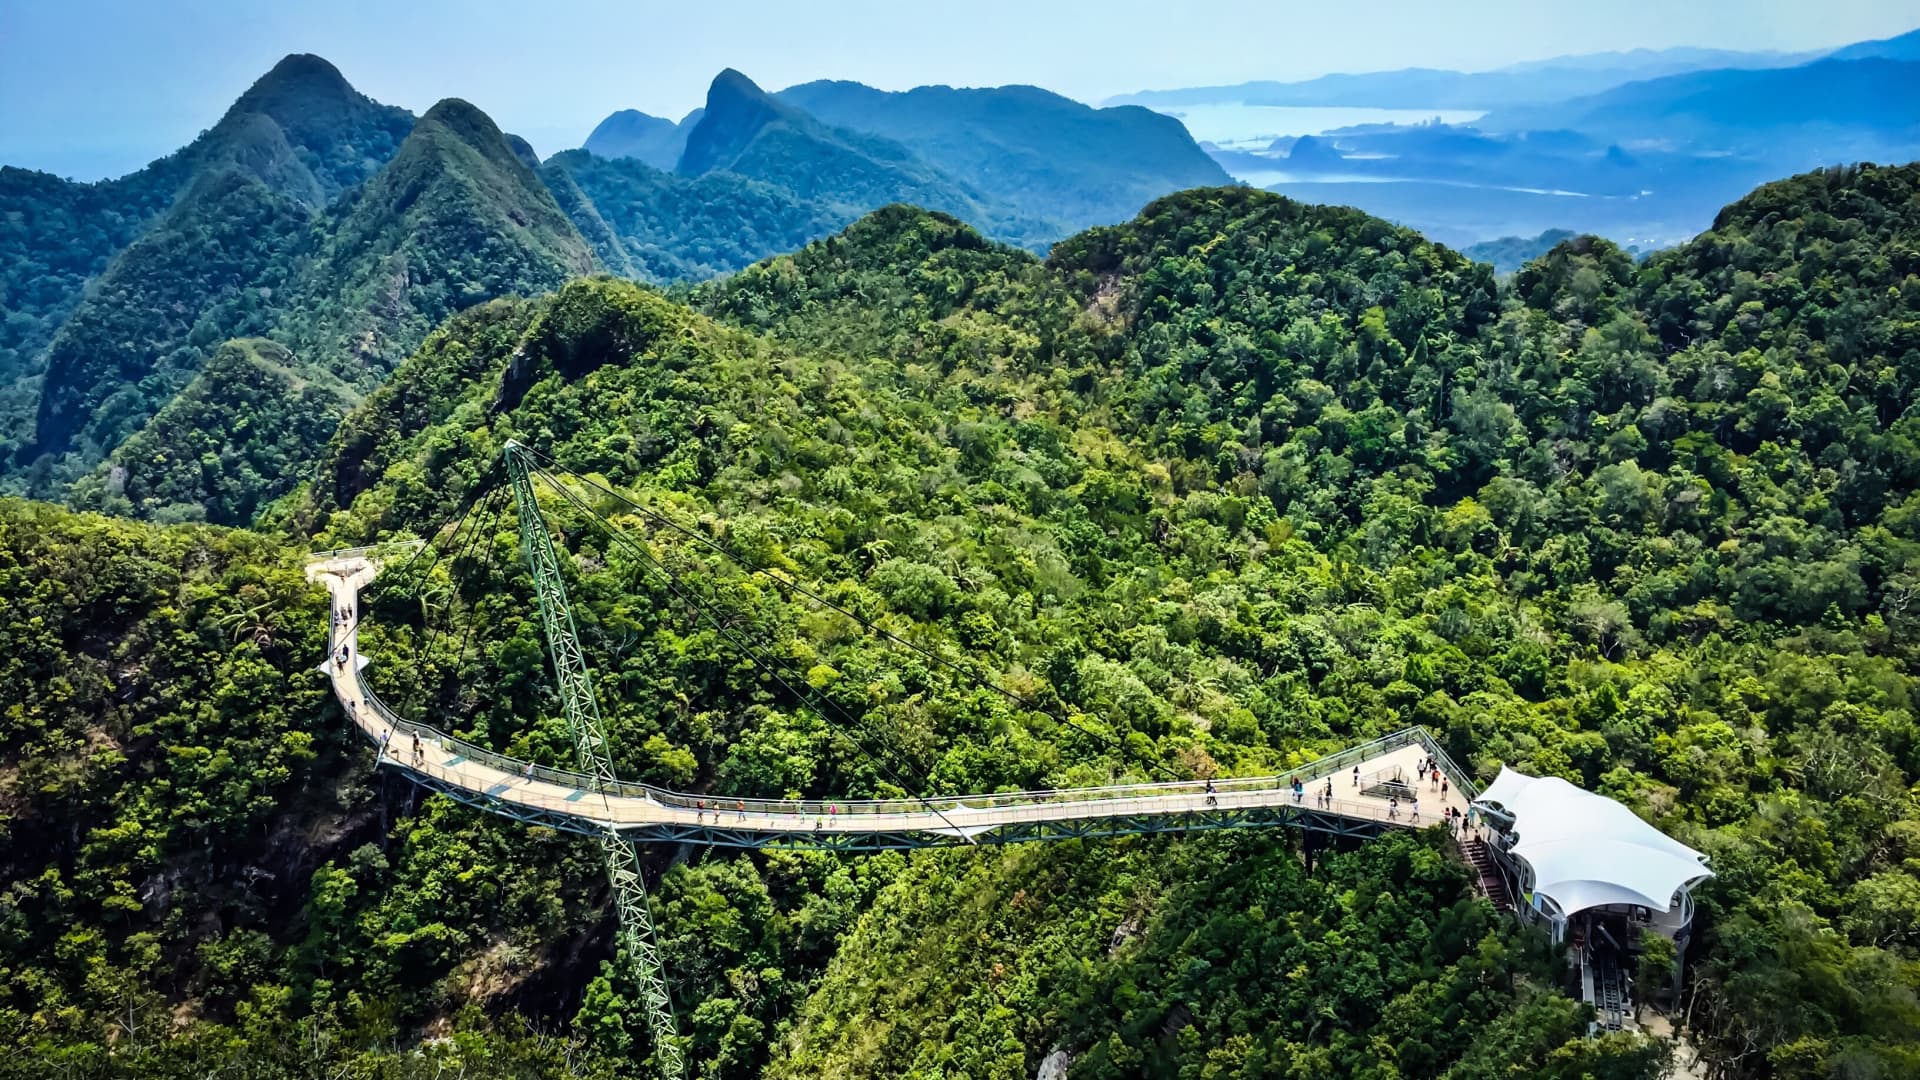 The Langkawi Sky Bridge is a curved suspension bridge popular with tourists.